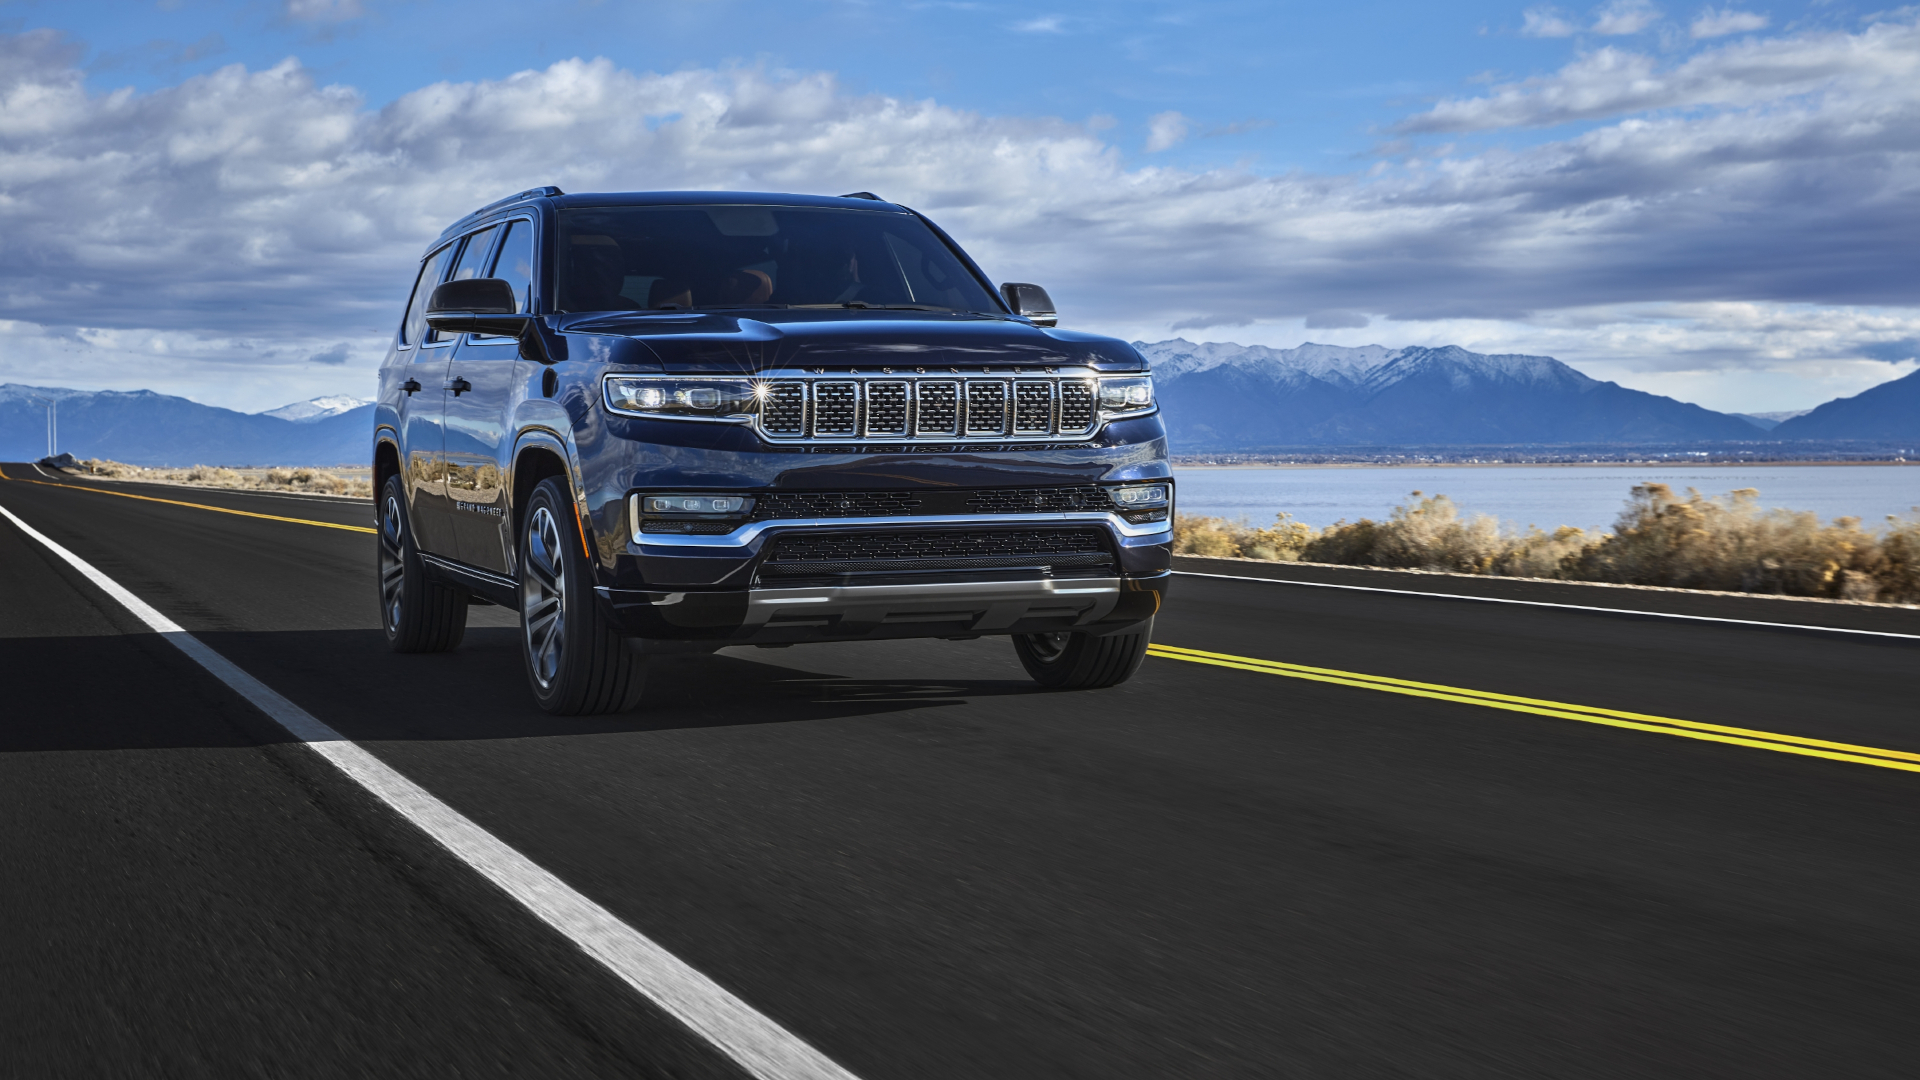 6 popular suvs that aren’t worth the cost — and 6 affordable alternatives